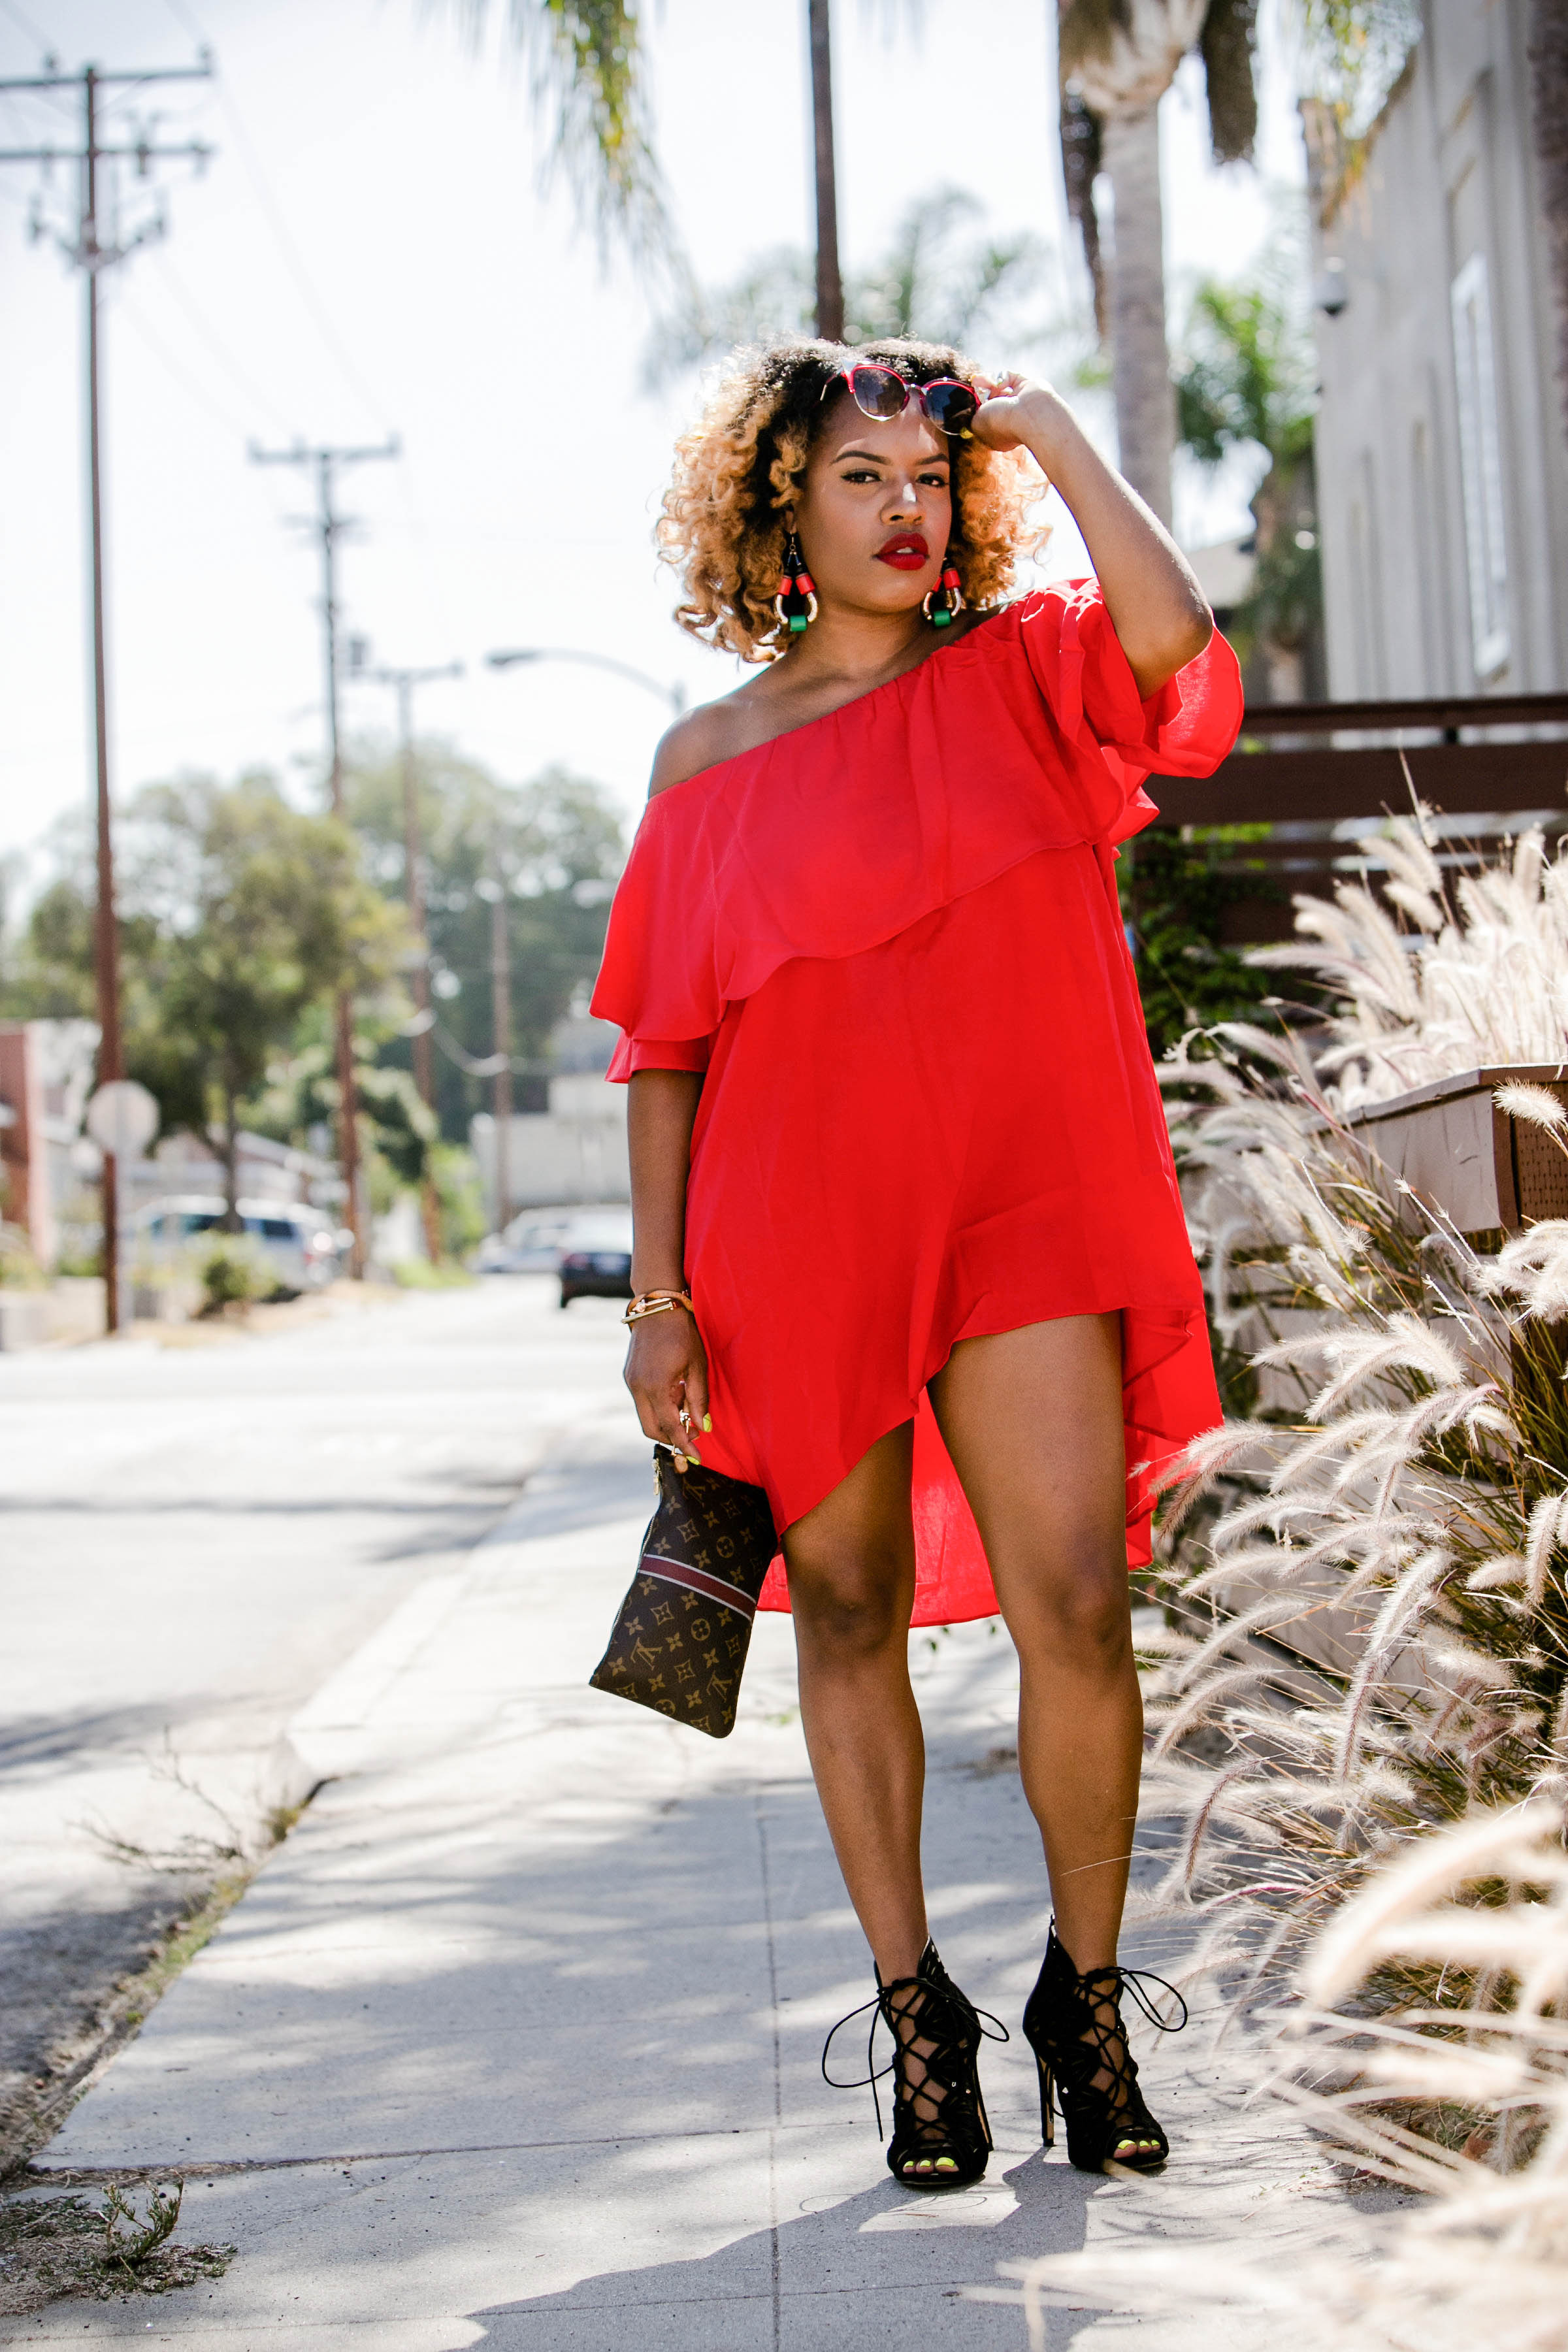 A Lil Fendi Sun Protection - https://thehautemommie.com/lady-in-the-red-dress/